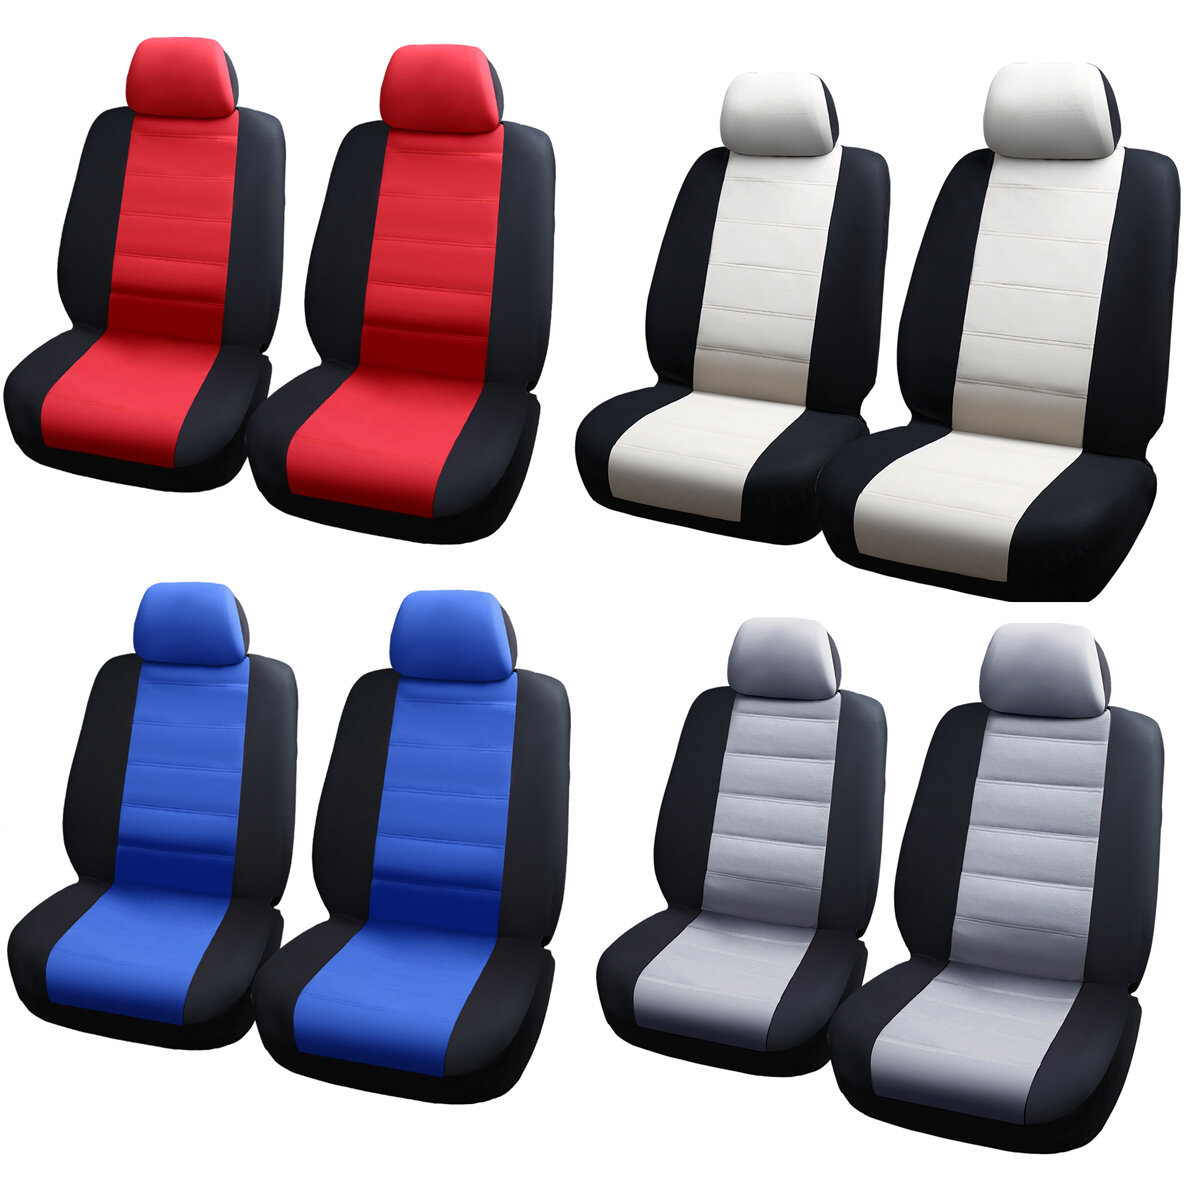 4PCS Universal Front Seat CoverCar Seat Covers Cushion Protectors Washable